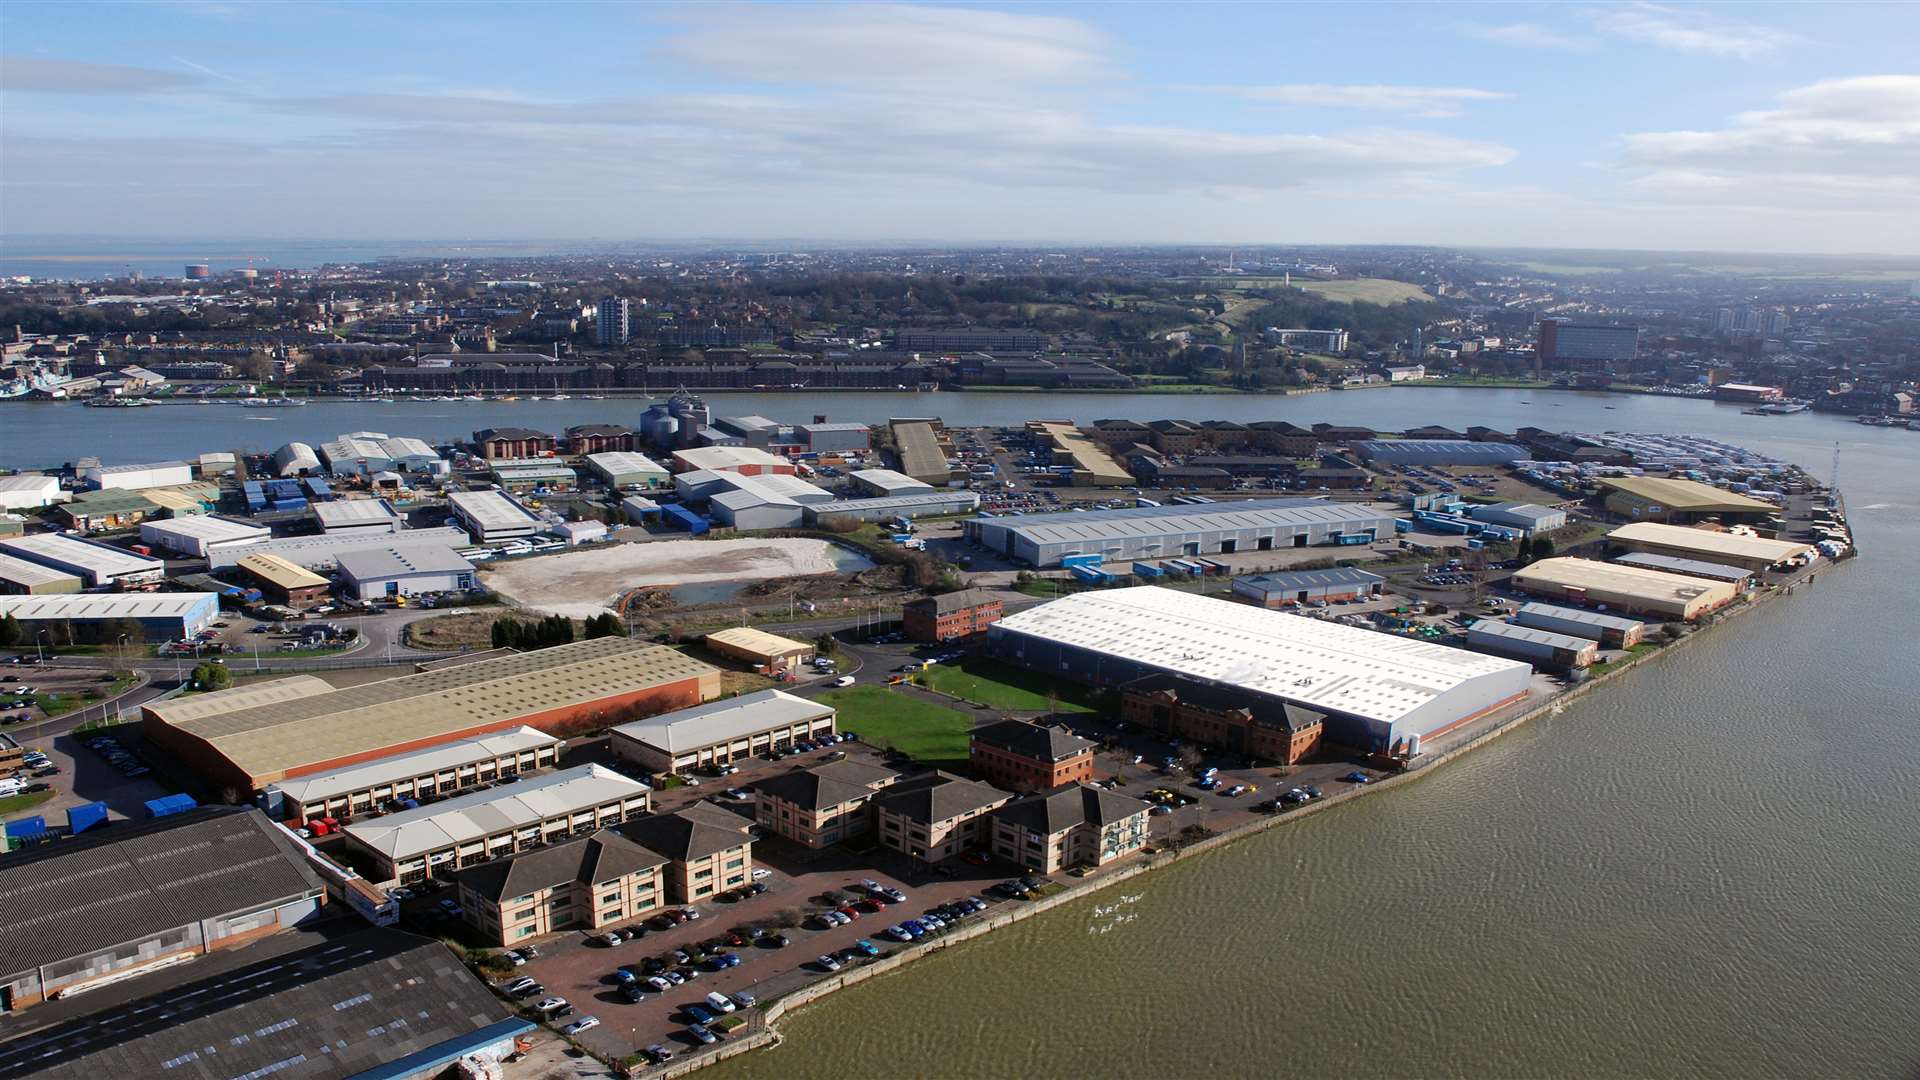 Medway City Estate in Strood is part of the Thames Gateway regeneration area which has helped boost Kent's GVA since the credit crunch